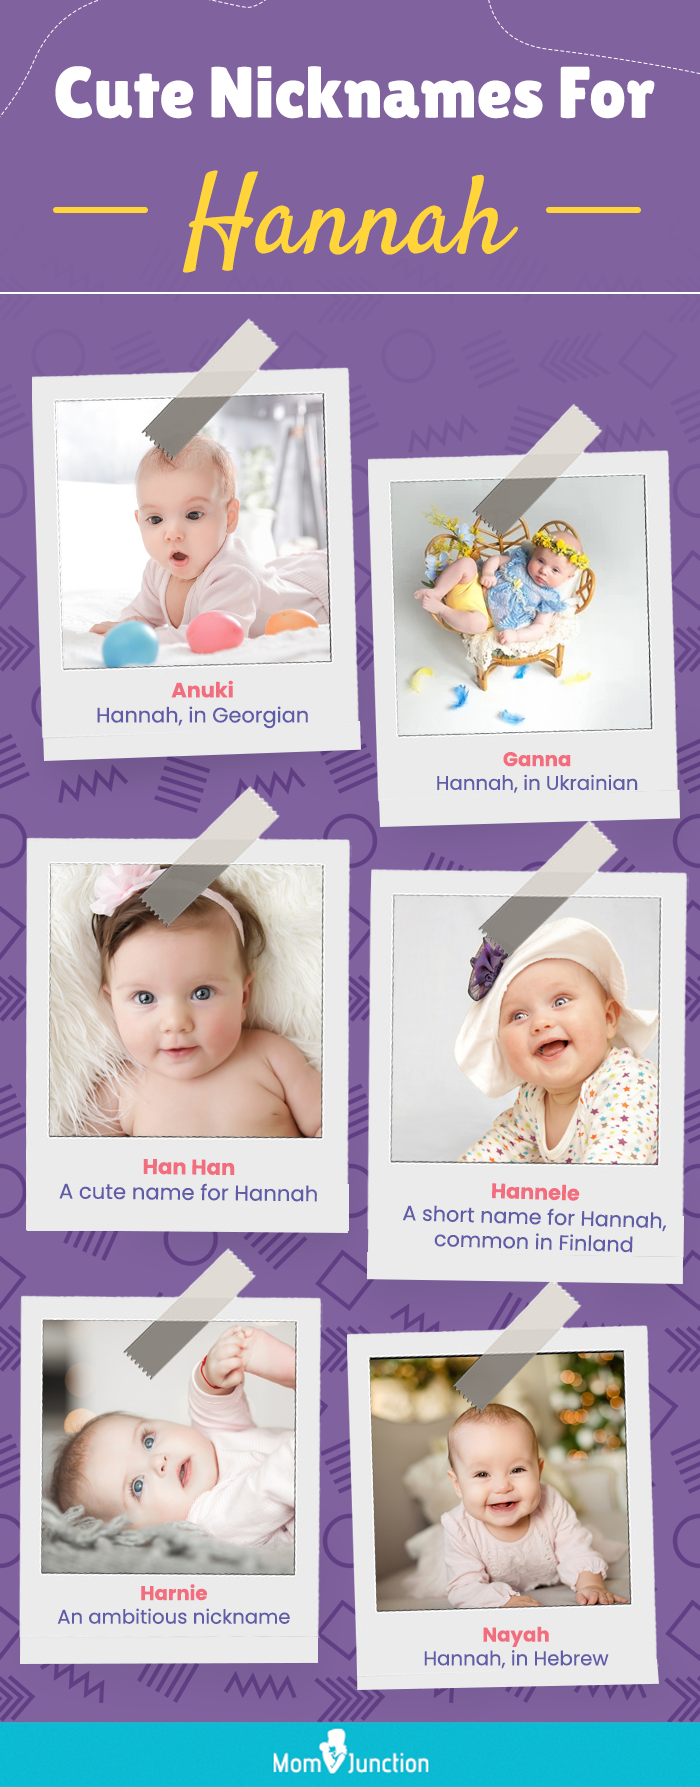 cute nicknames for hannah (infographic)